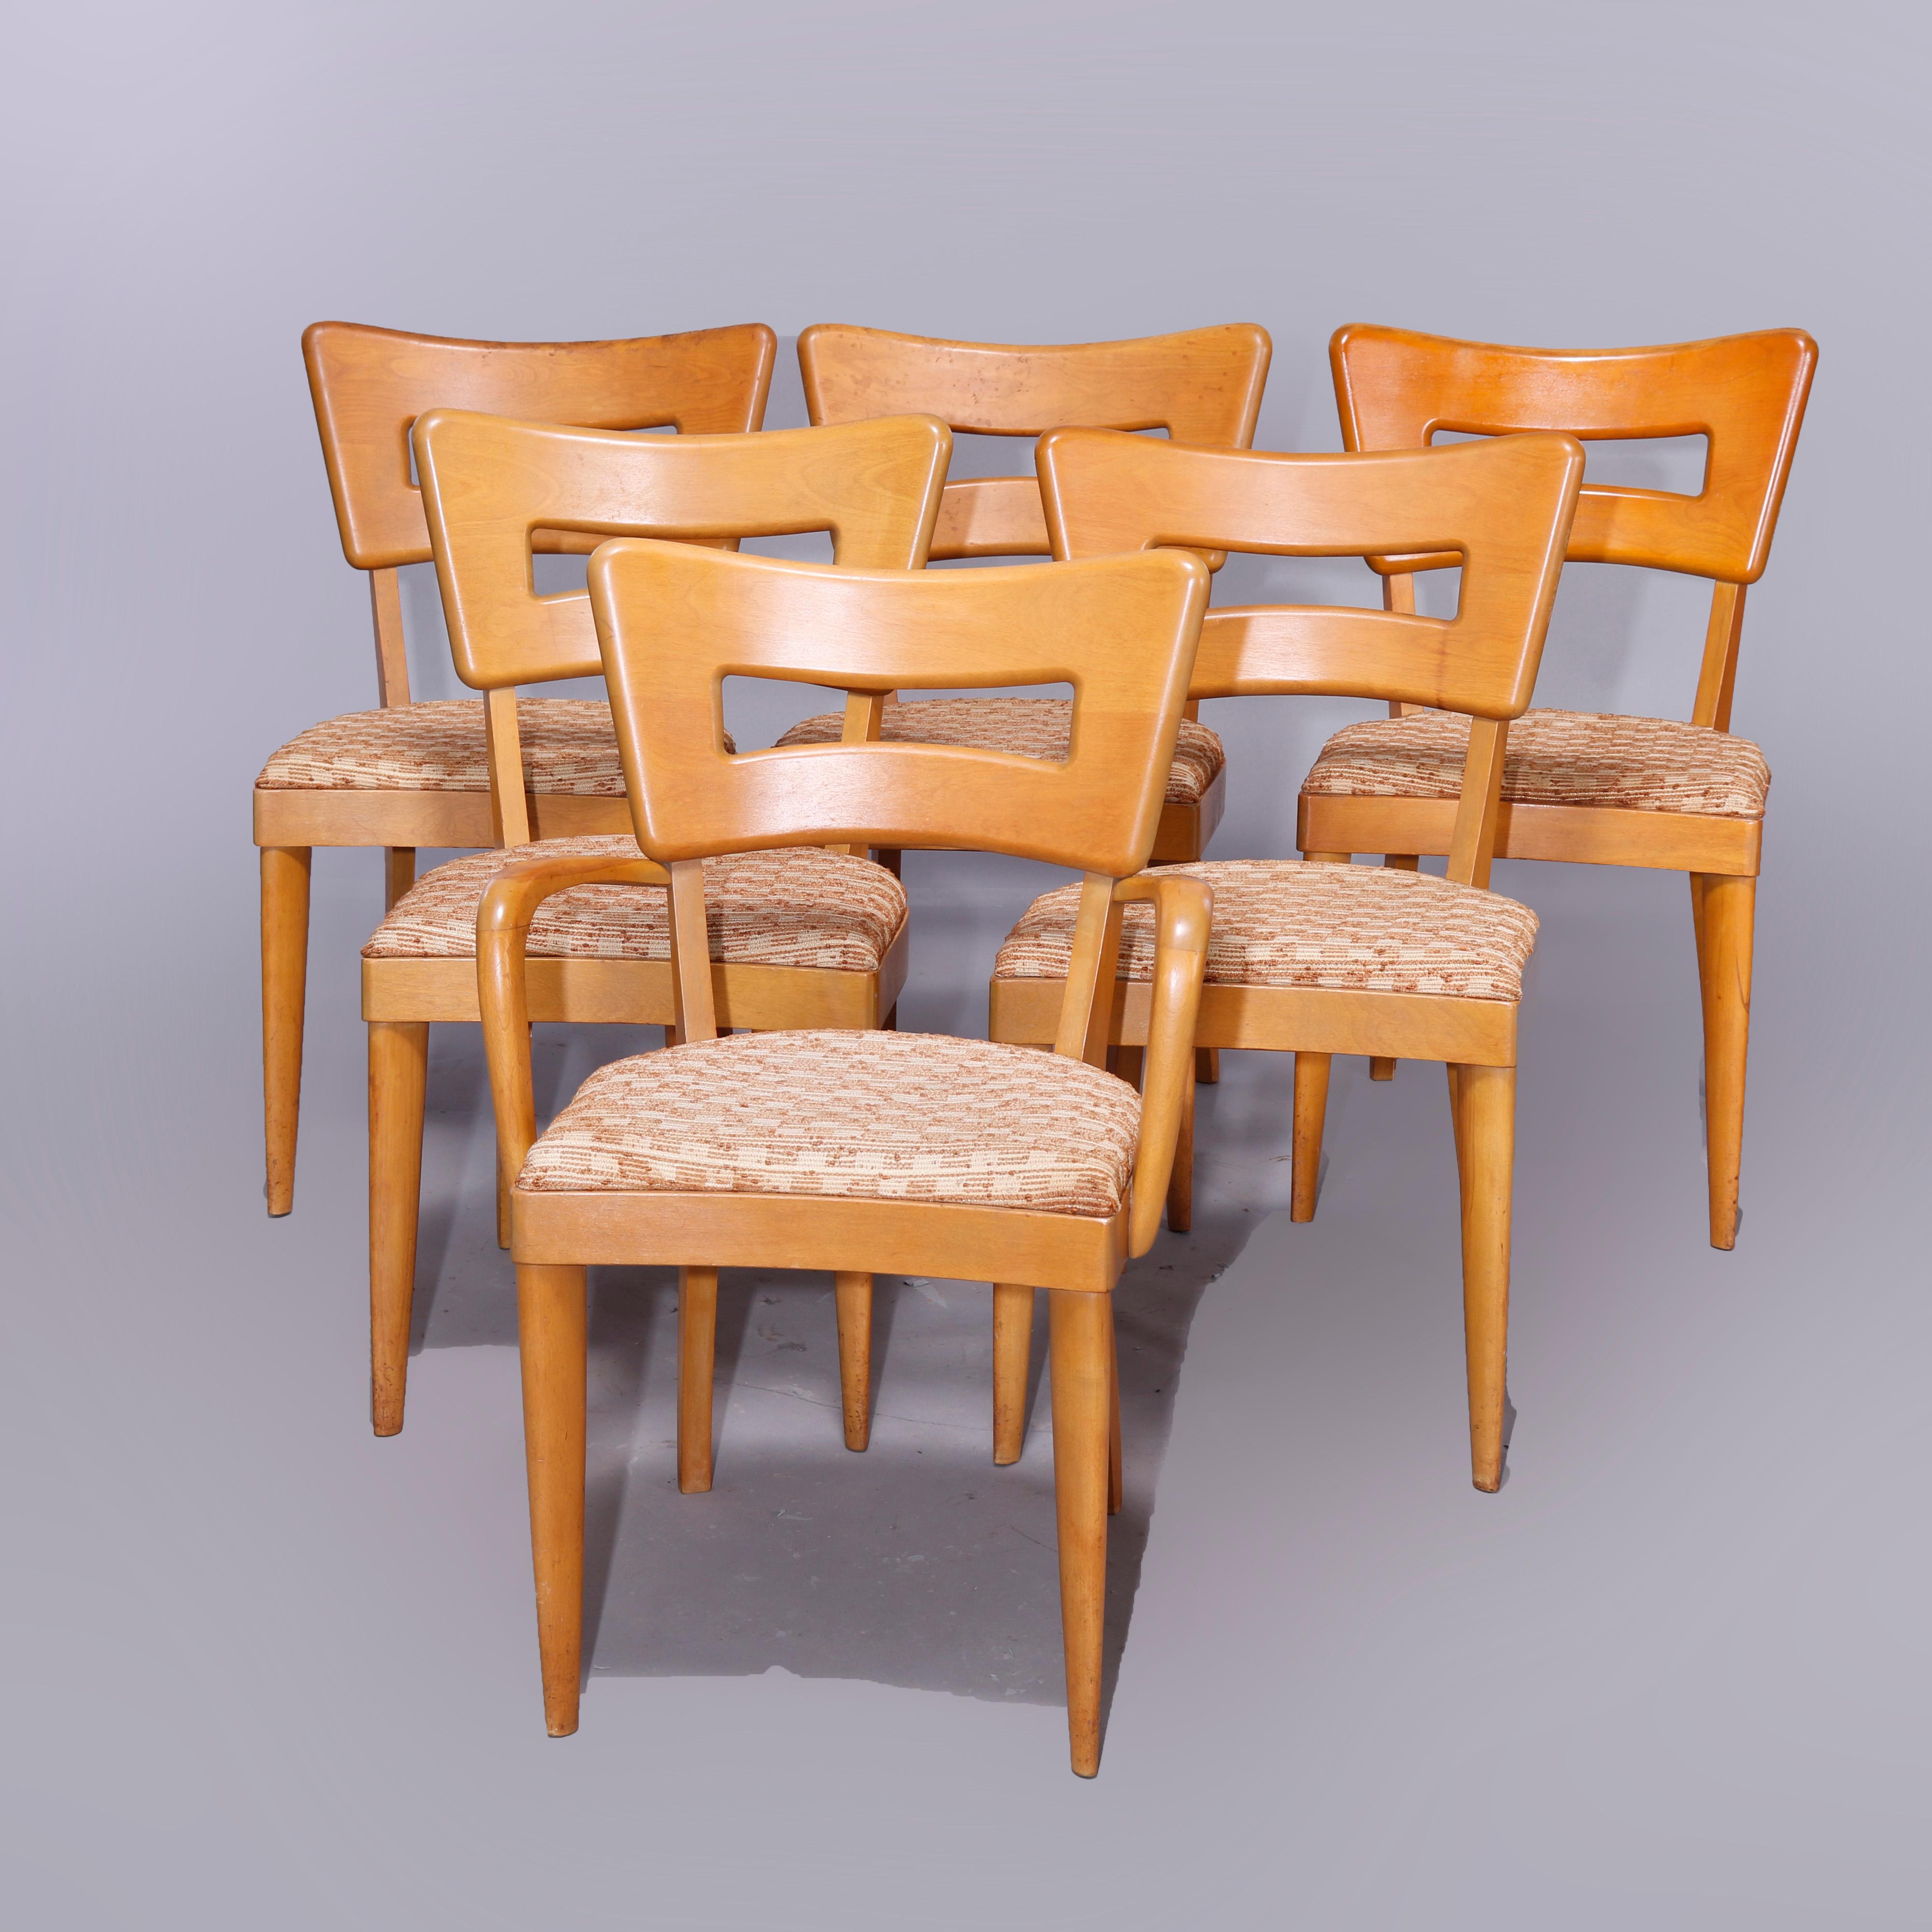 A Mid-Century Modern set of six dining chairs by Heywood Wakefield in the Dog Bone (Wish Bone) pattern offer birch construction in Wheat finish, maker mark as photographed, c1950

Measures- 33'' H x 22'' W x 22'' D. 

 